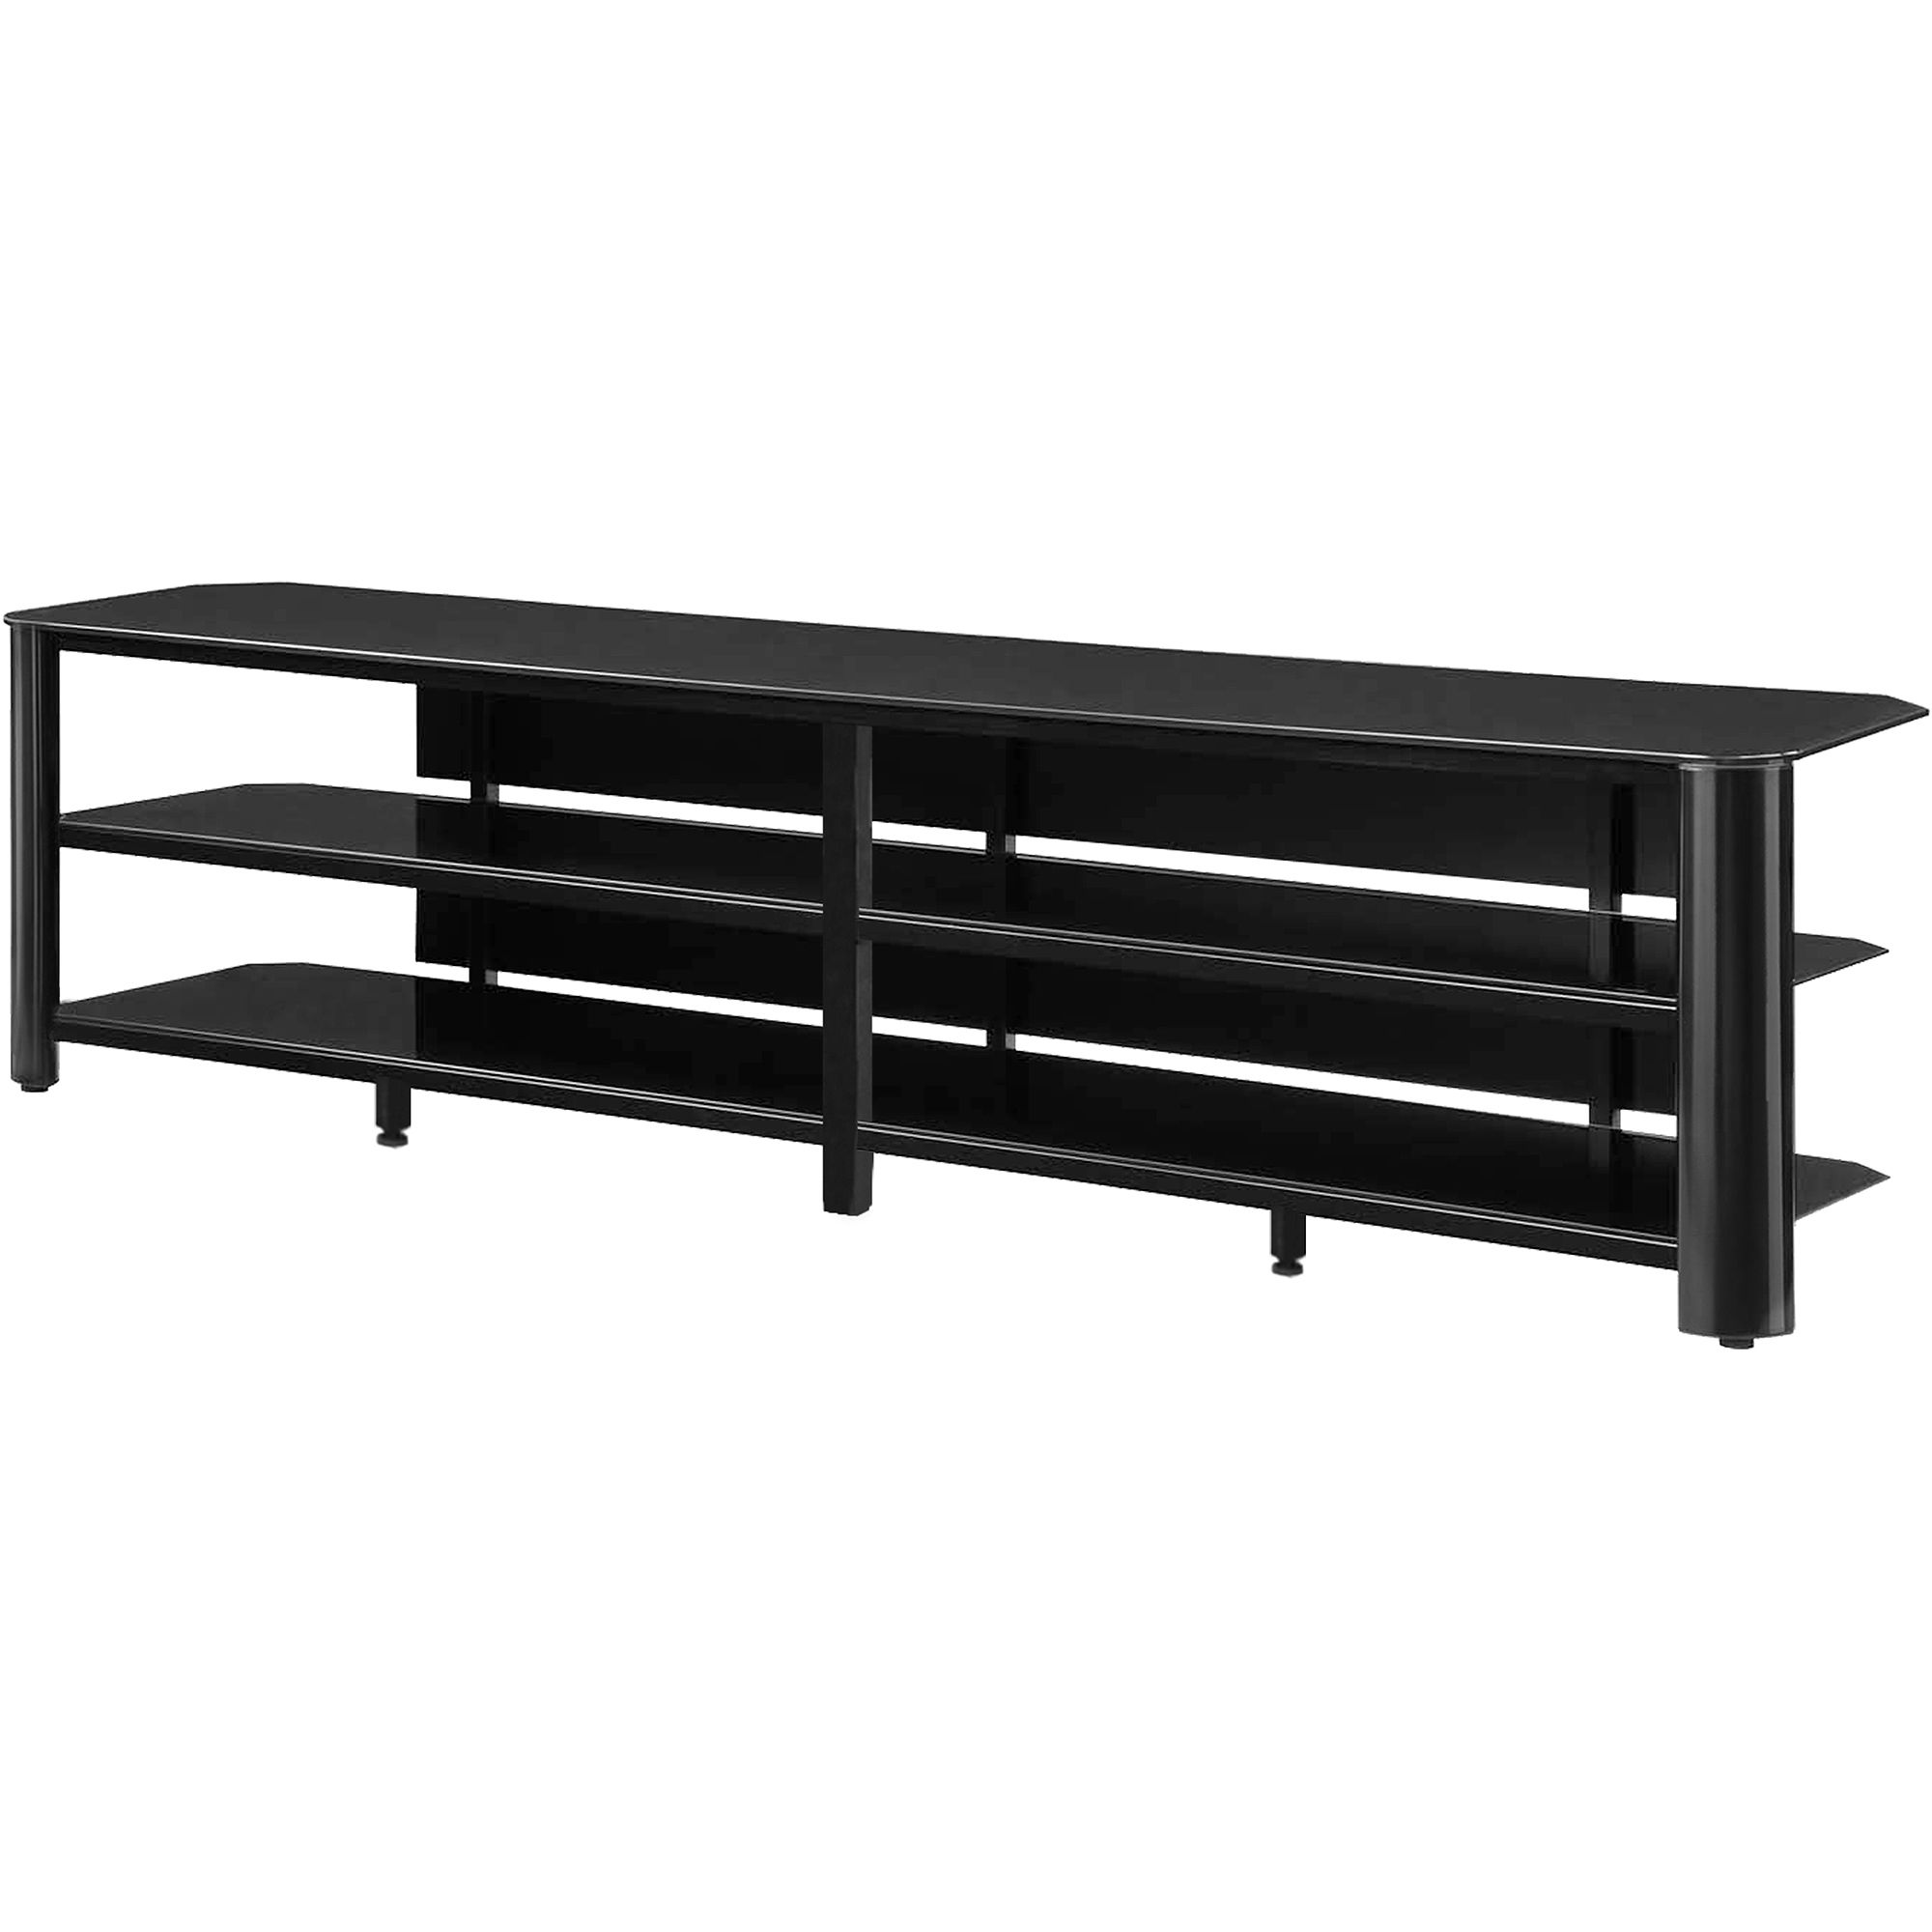 Innovex Oxford Glass Black Tv Stand For Tvs Up To 83" – Walmart In Oxford 84 Inch Tv Stands (View 5 of 30)